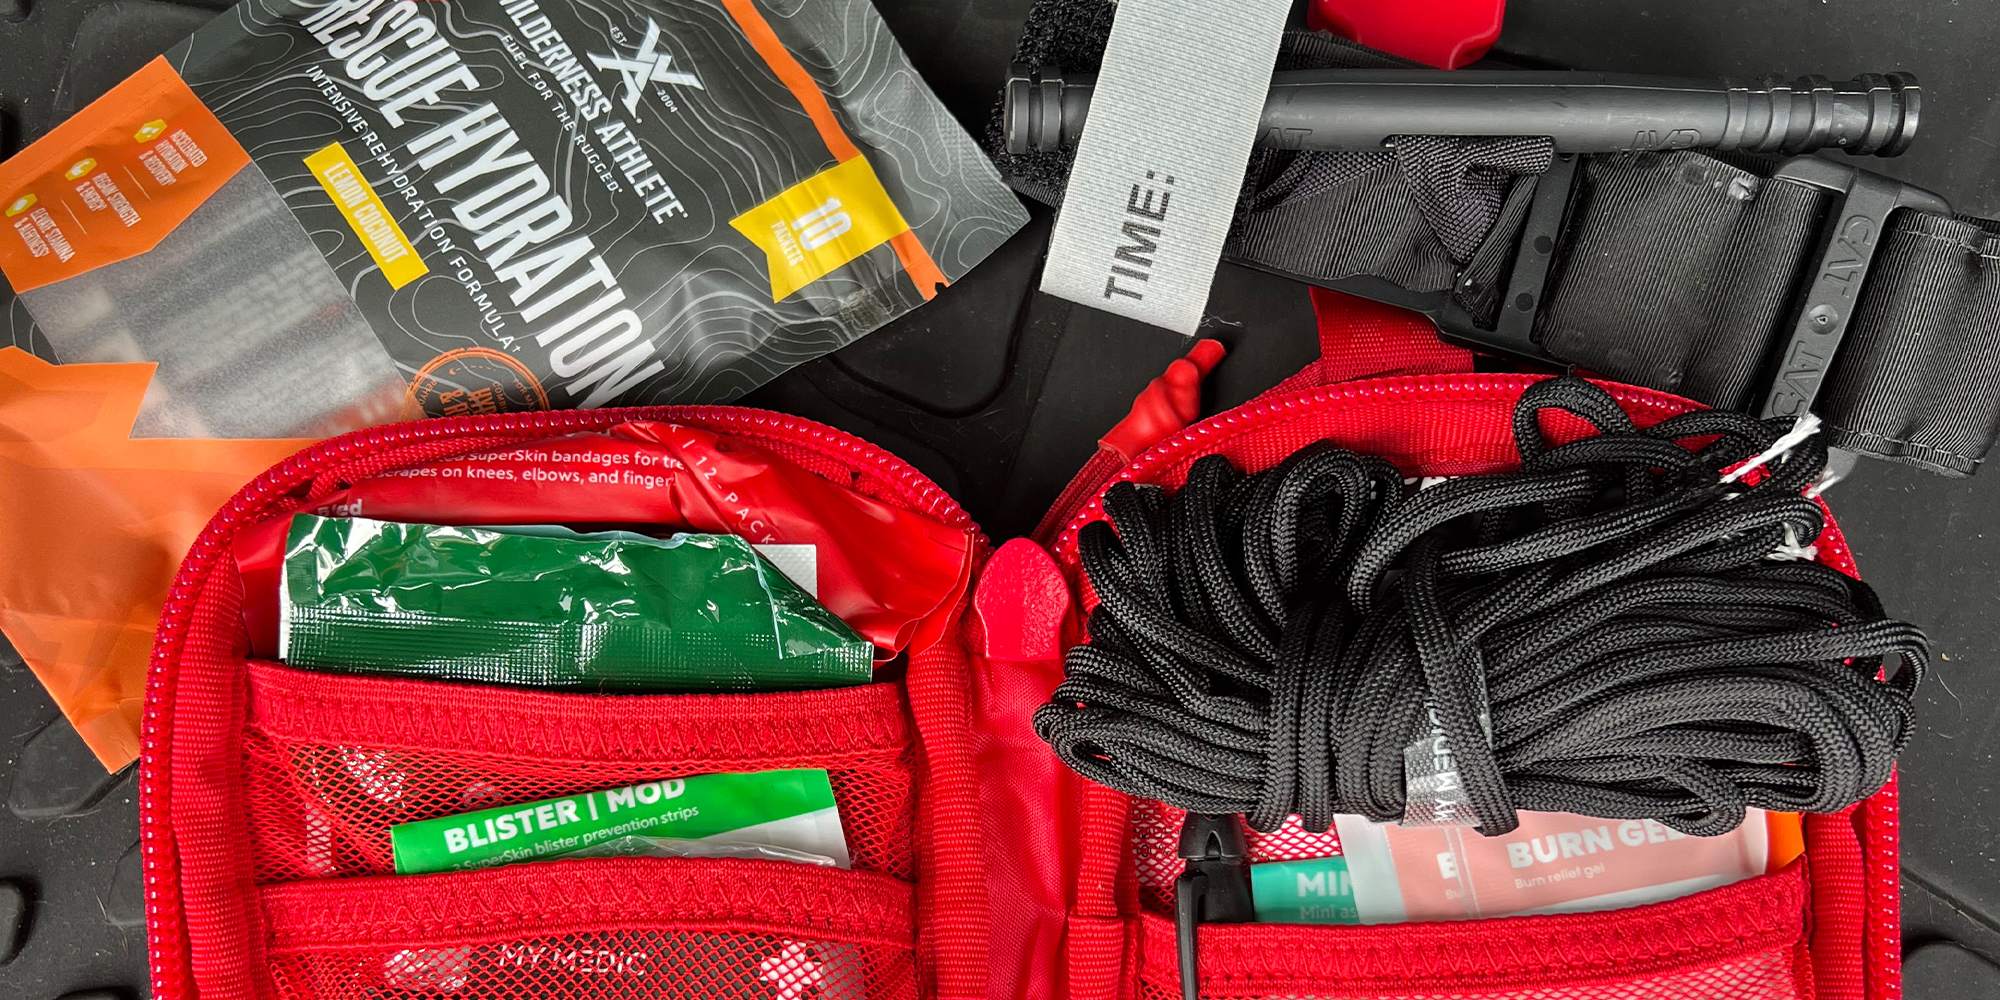 How to Build the Perfect Med Kit